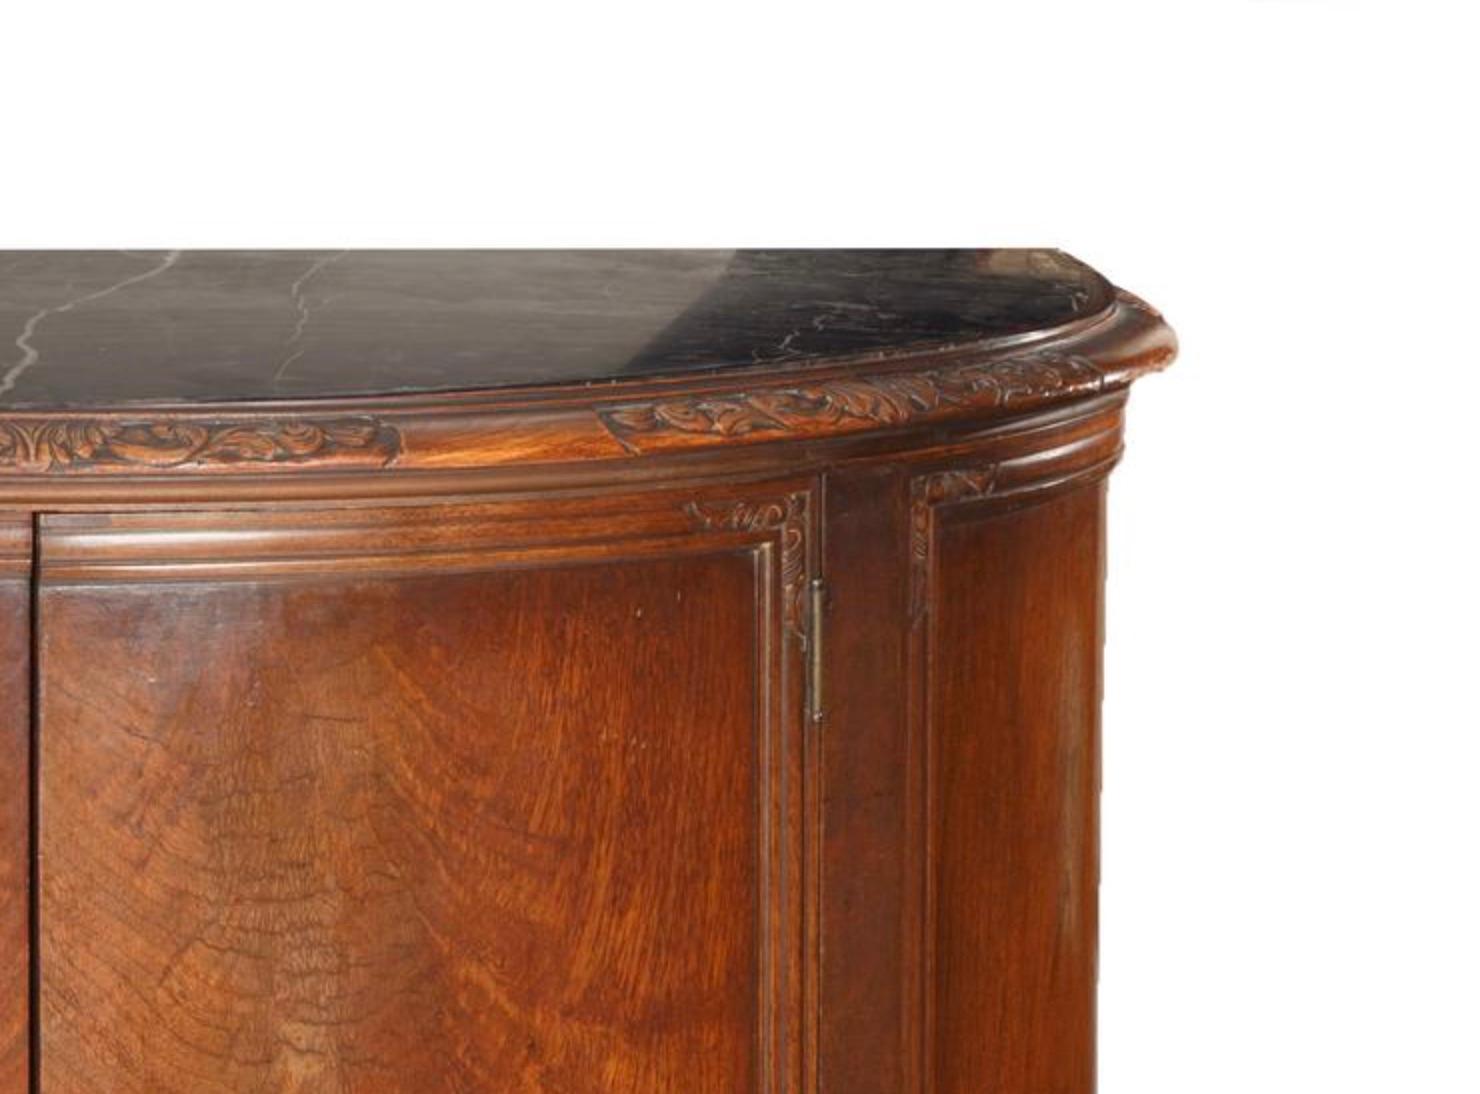 French Mahogany Wood Demilune Shape Marble Inserted Top Sideboard / Server For Sale 3